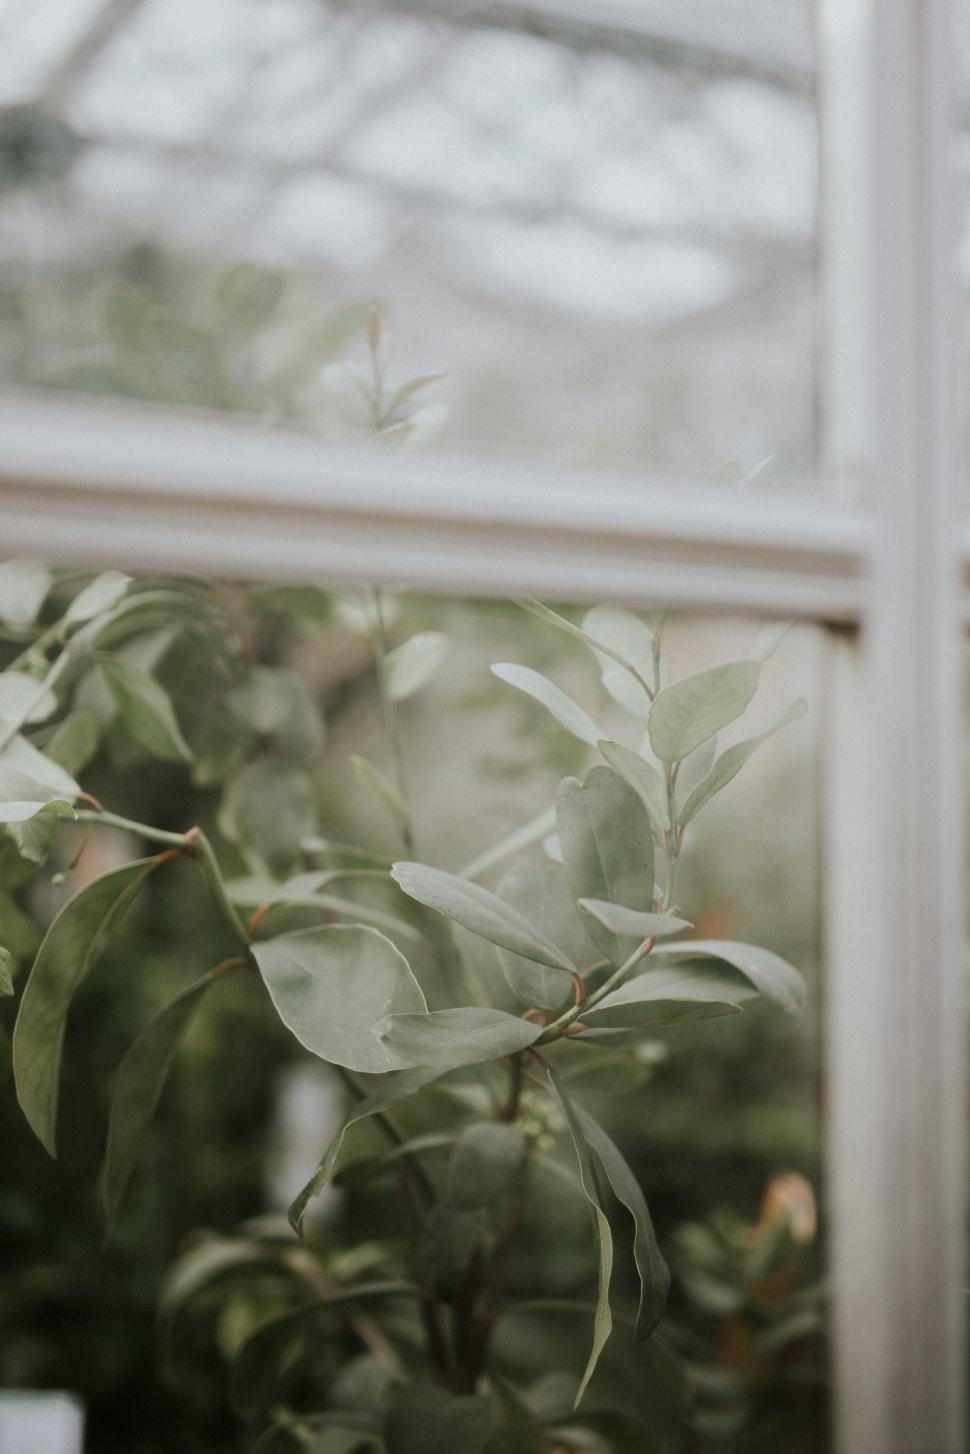 Free Image of Potted Plant in Front of Window 